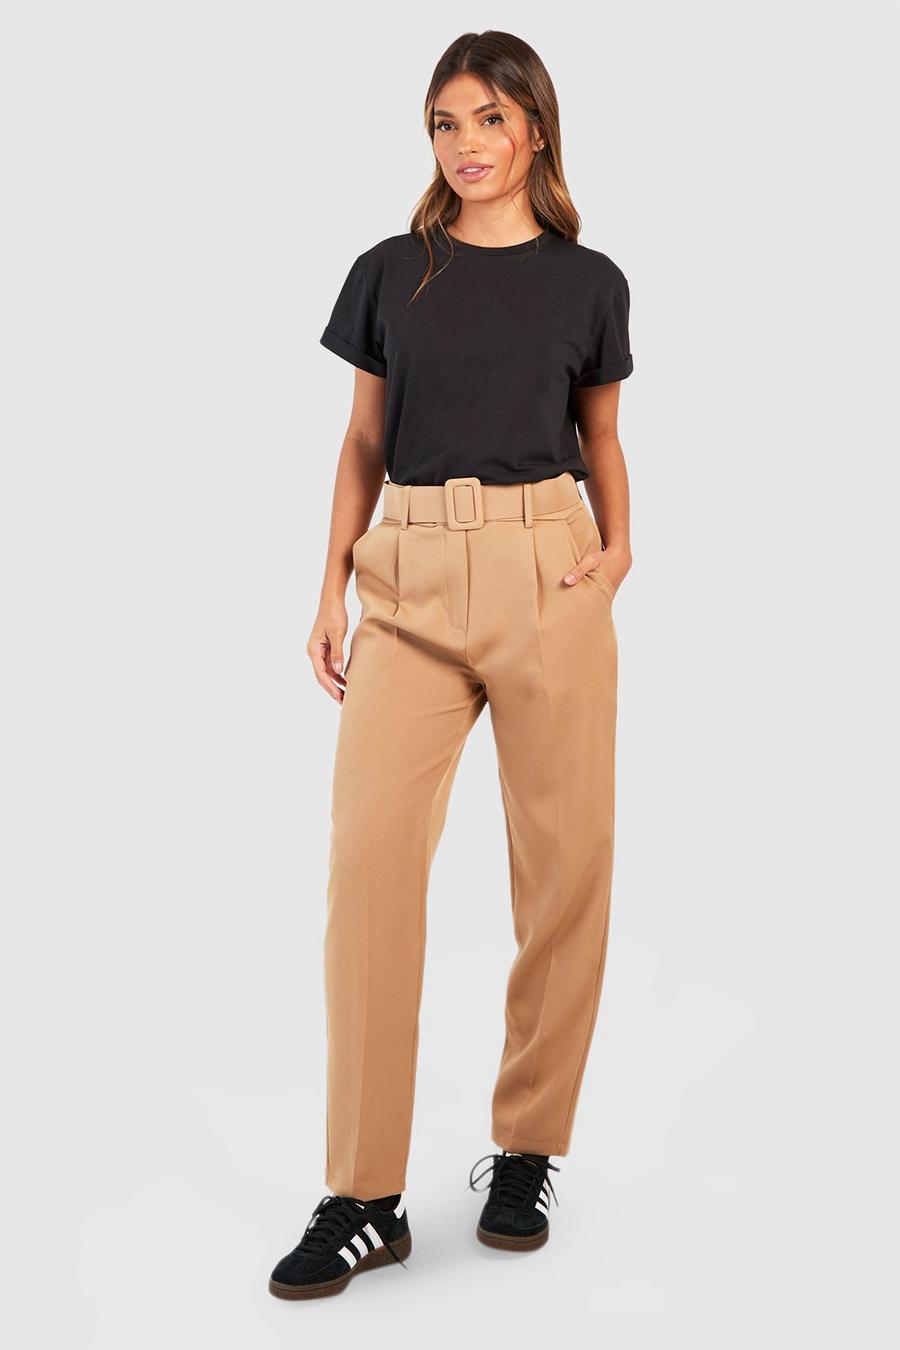 Camel Self Fabric Belted Slim Fit Trousers